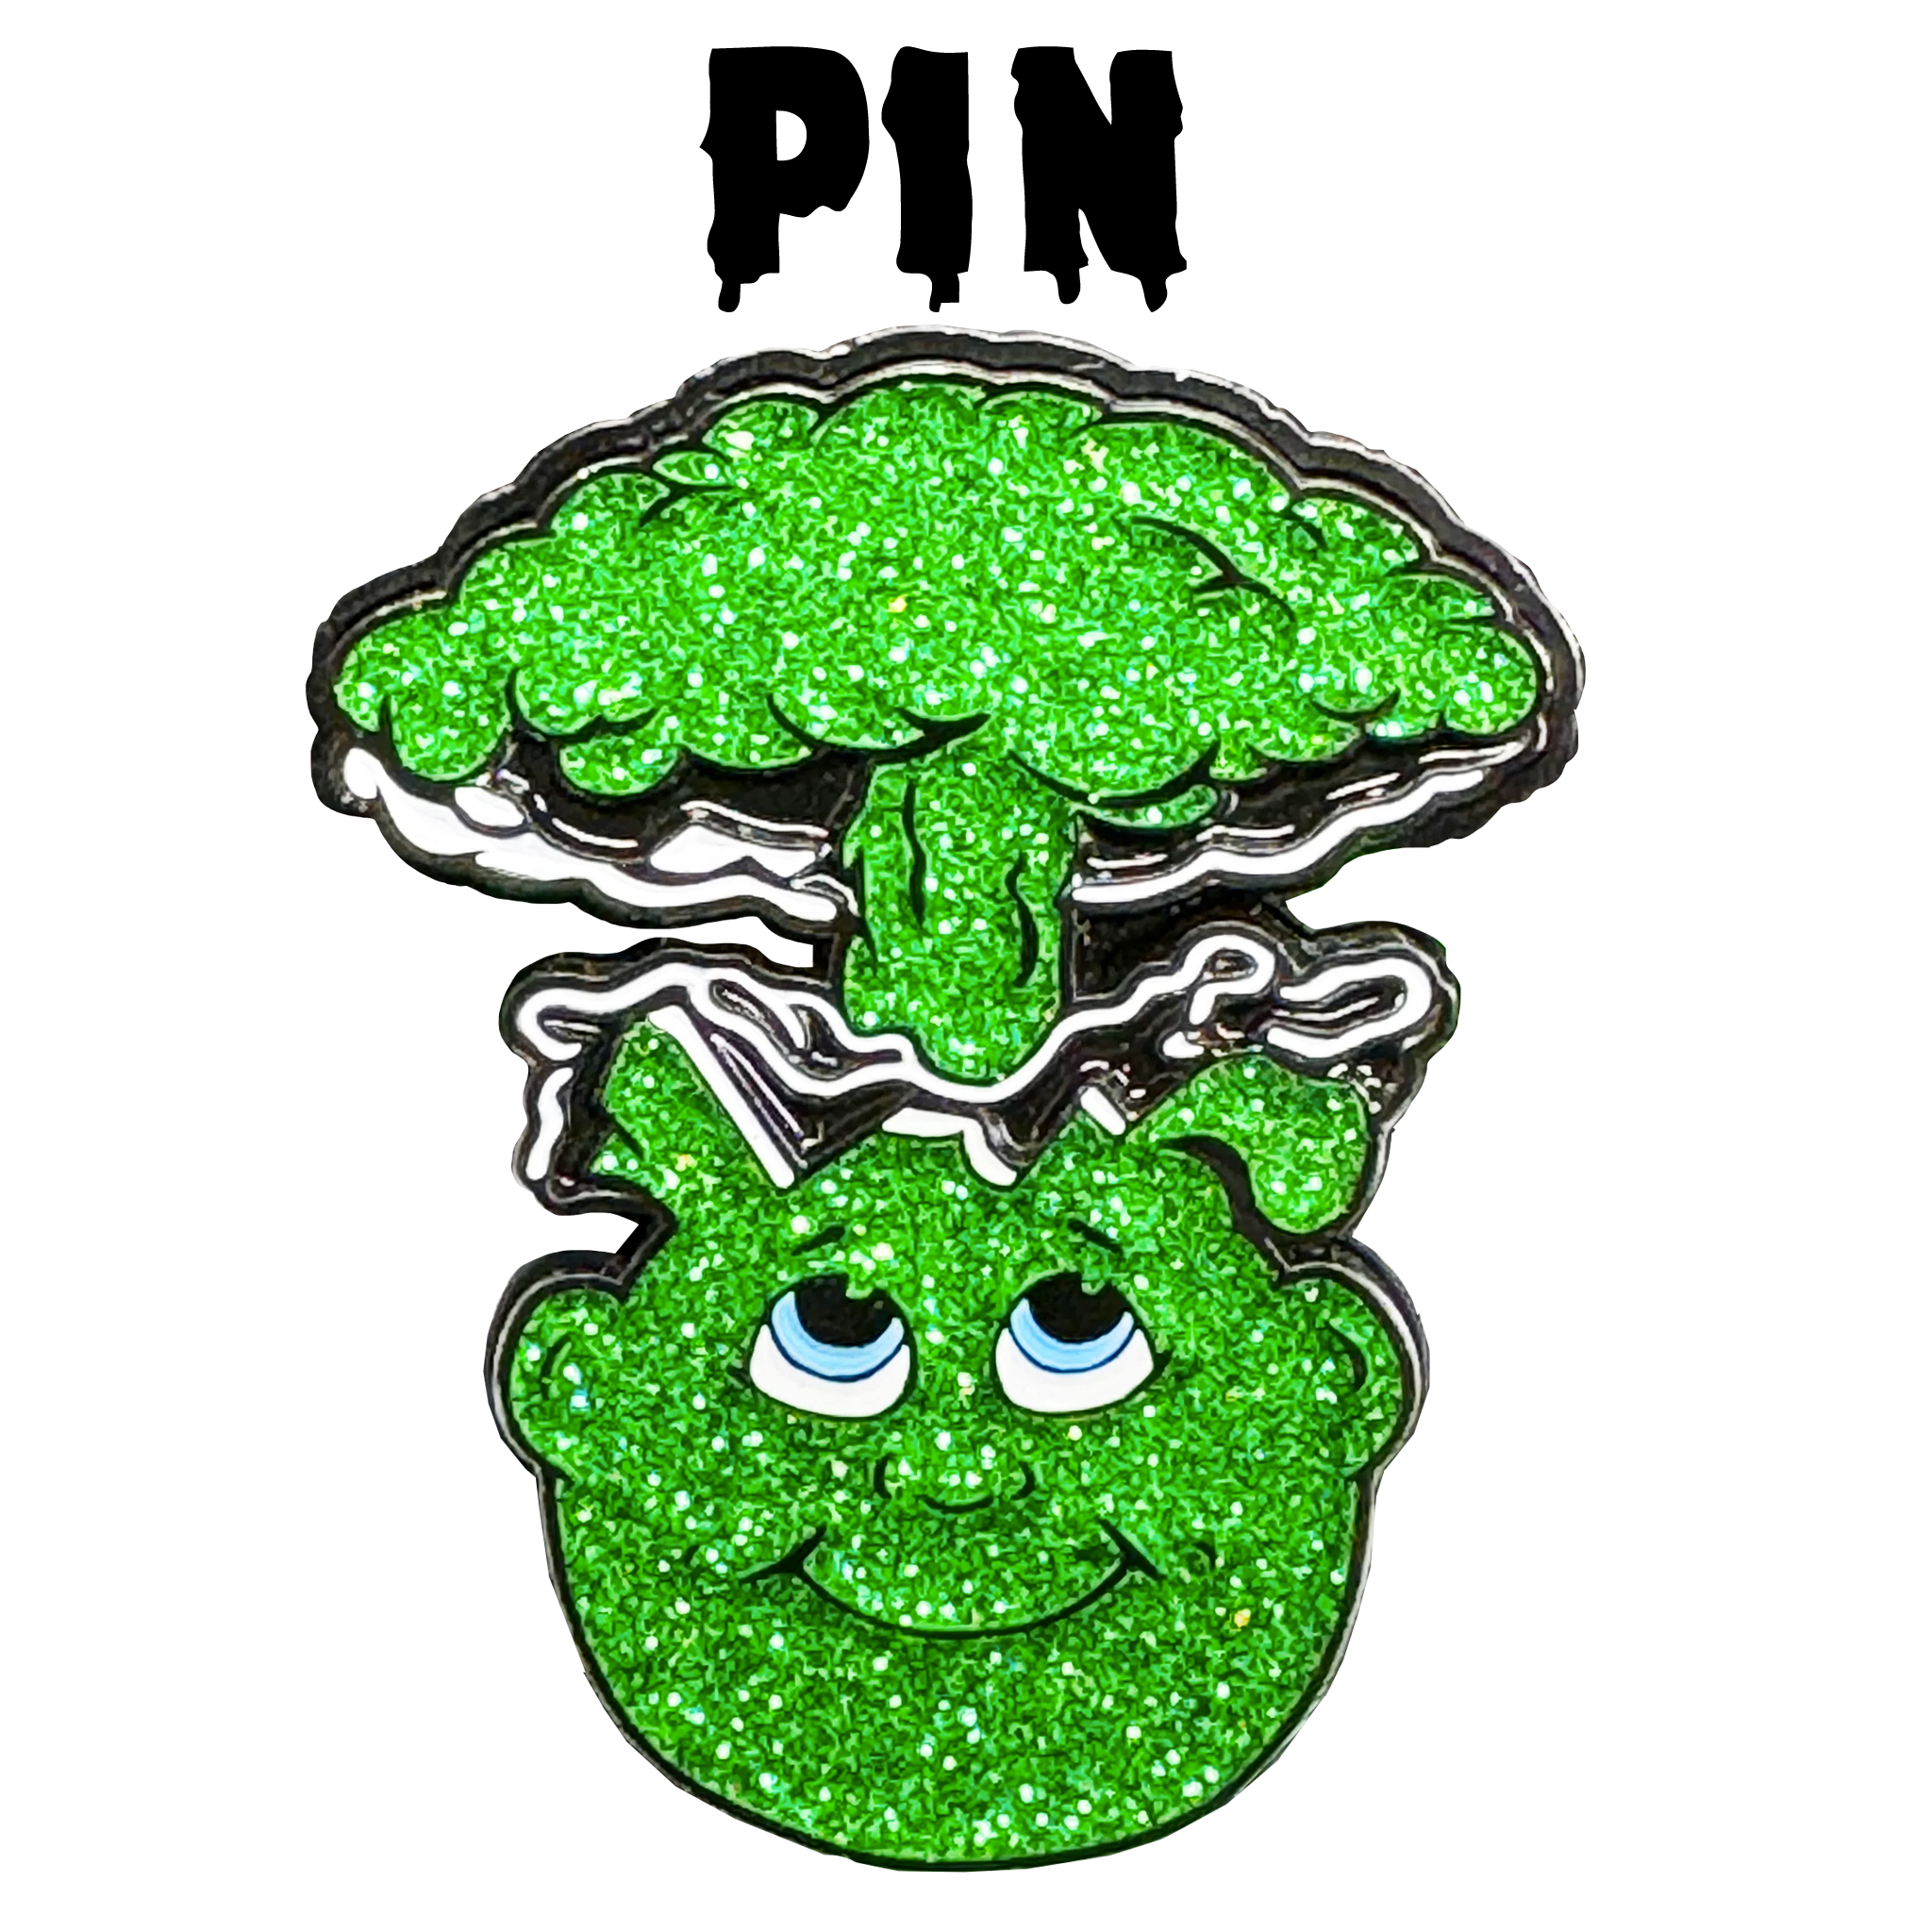 STRICT 1 PIN LIMIT: Green Glitter Adam Bomb pin: limited to 5 pieces with individual serial number